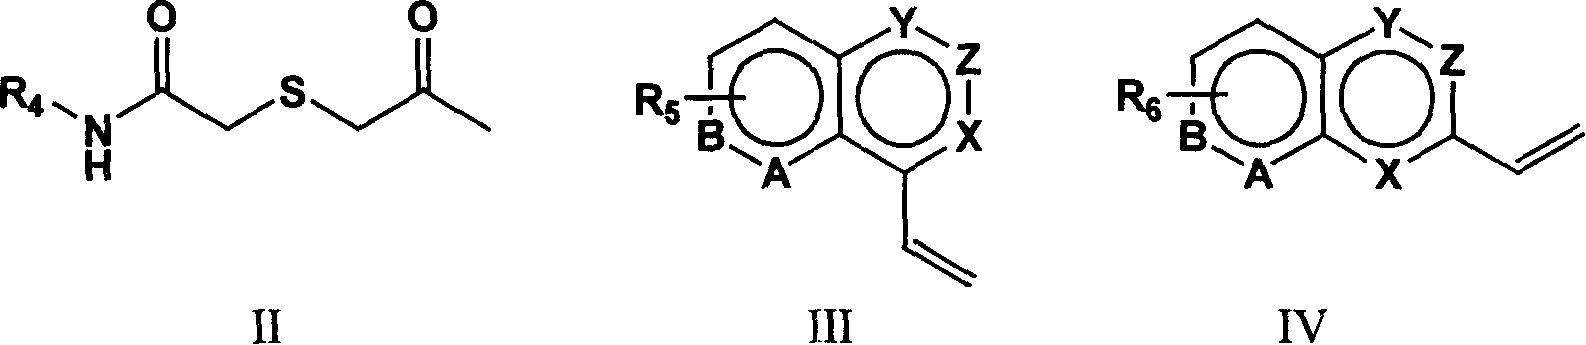 1-substituted-4,4-2 substituted thiosemicarbazide compounds, production method and uses of the same